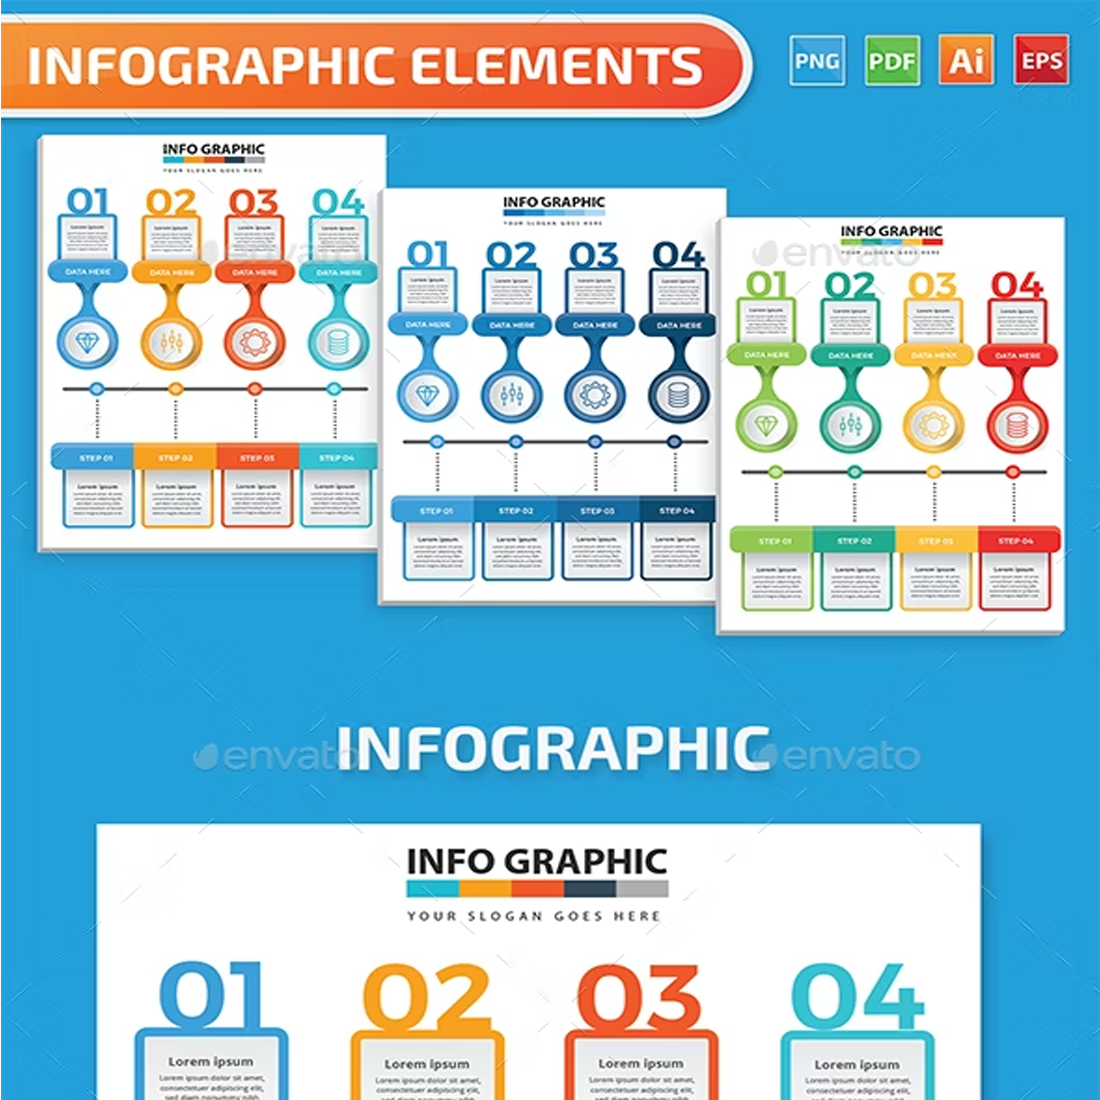 Images preview infographics design.